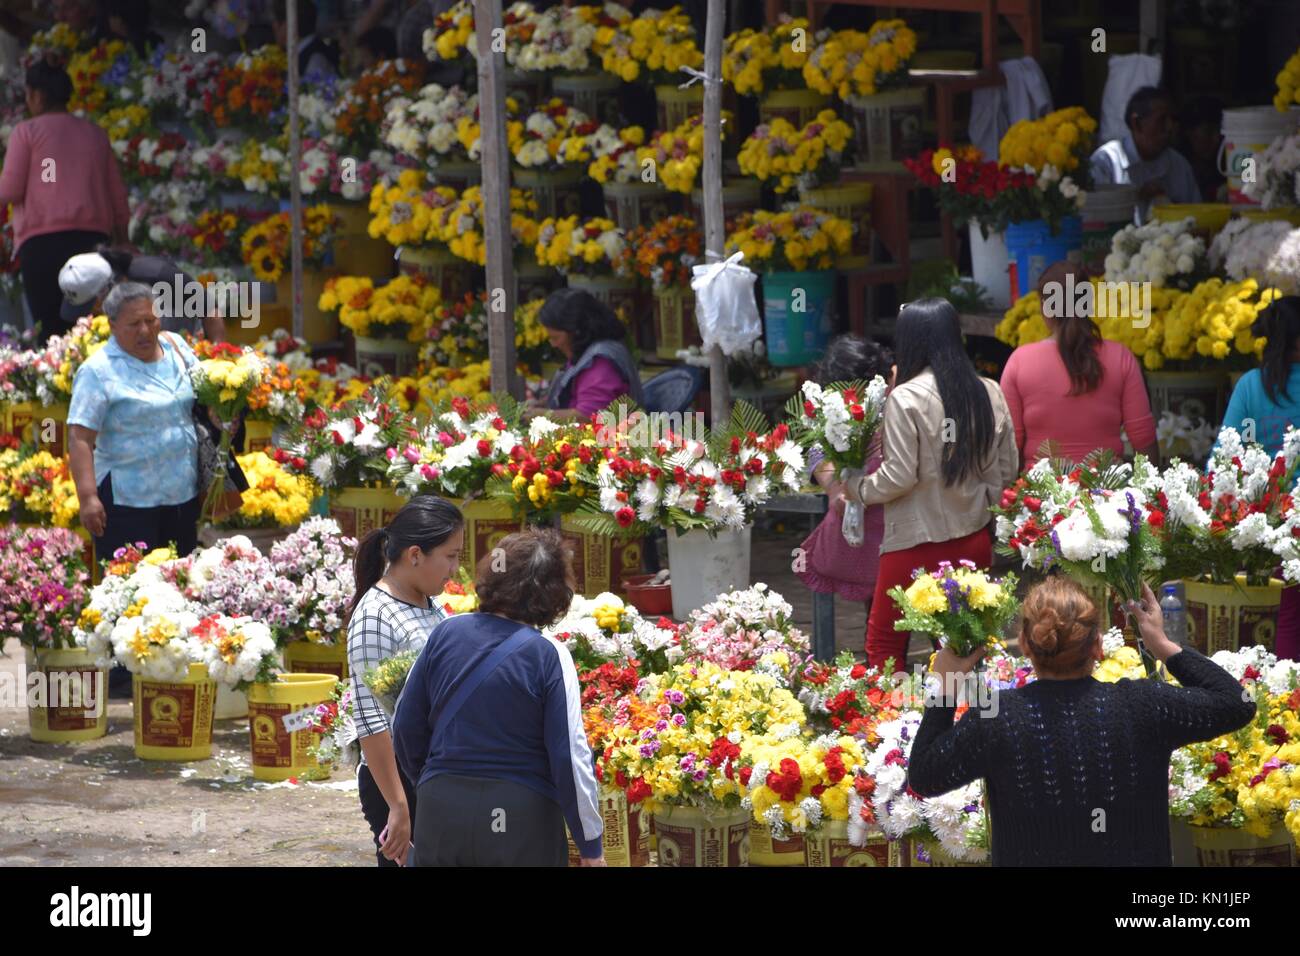 Lima, Peru - November 2nd, 2017: Flowers on sale near the Parque del Recuerdo cemetery ahead of the Day of the Dead holidays. Lima, Peru Stock Photo